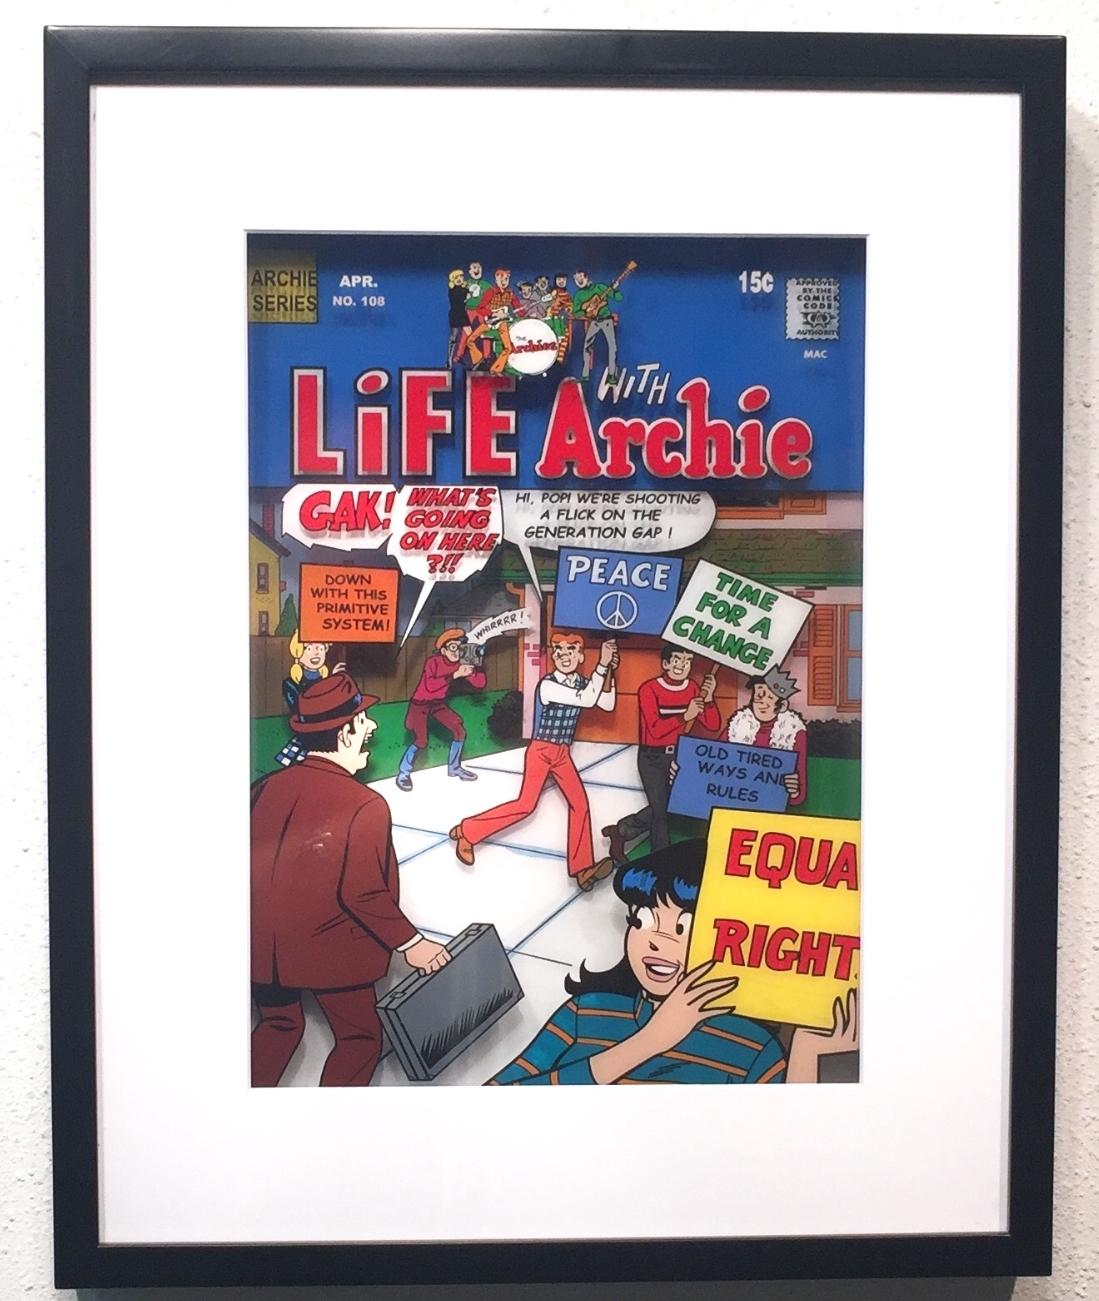 Life with Archie, Volume 1, #178, 1971 - Pop Art Art by Michael Suchta